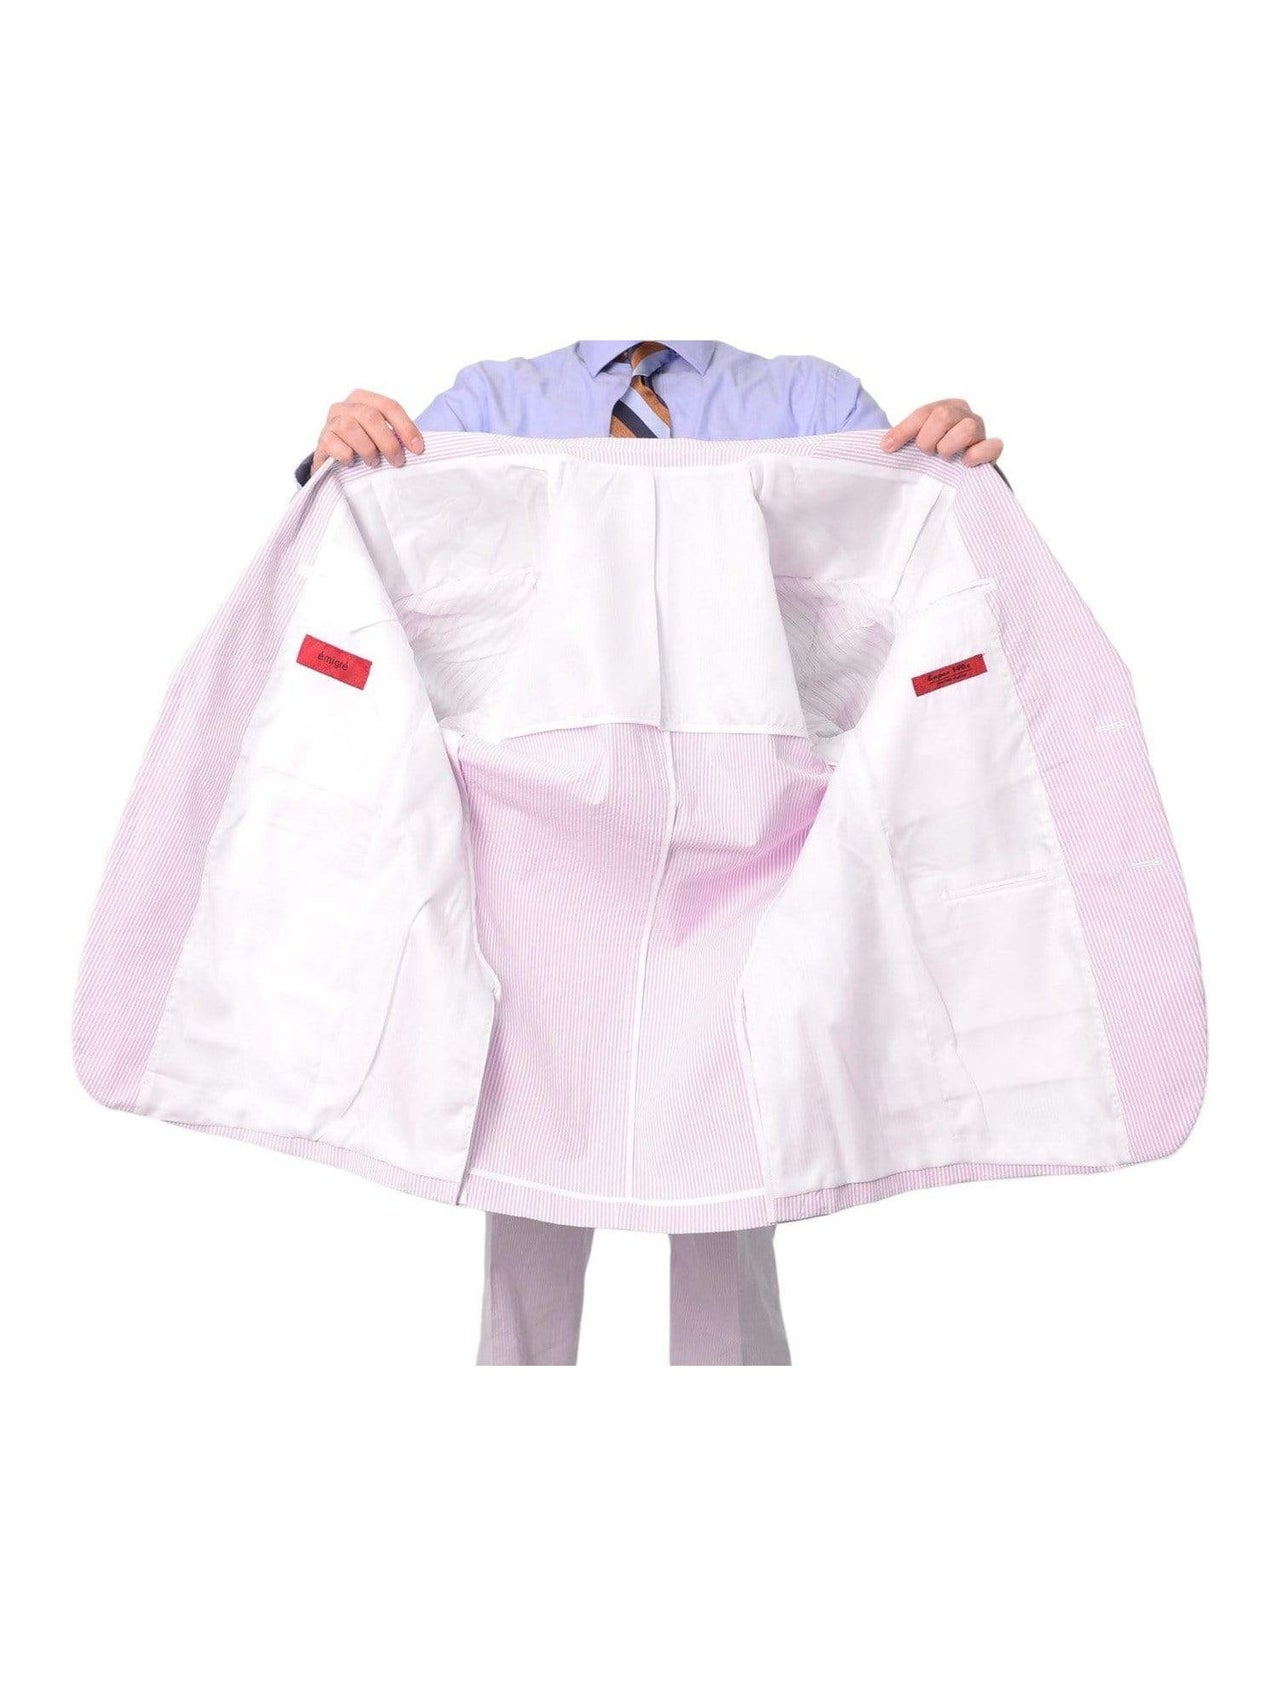 lining of pink and white striped seersucker suit jacket